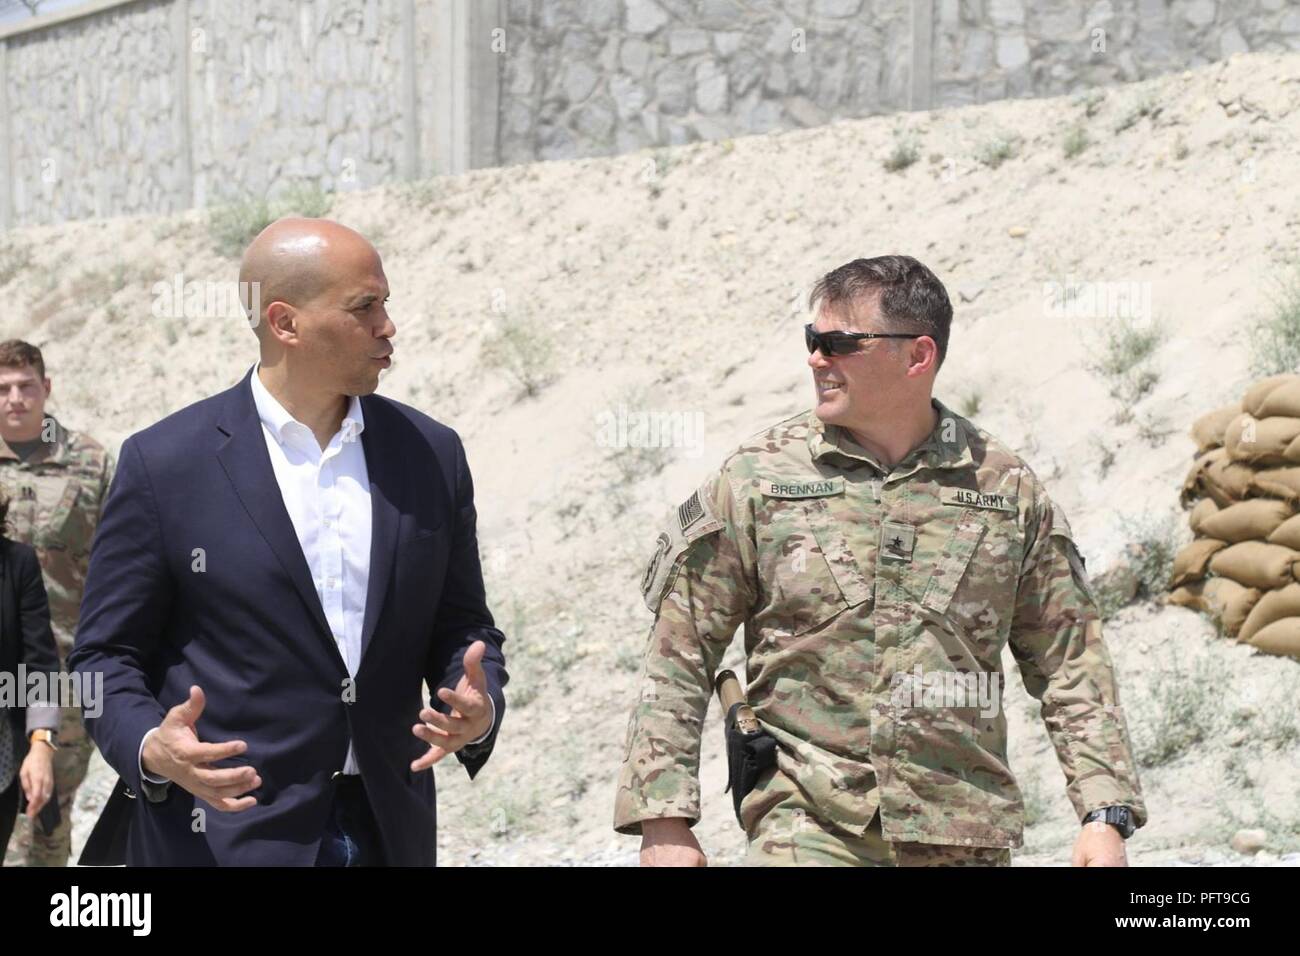 Senator Cory Booker visits 1st Stryker Brigade Combat Team, 4th Infantry Division assigned to Train Advise Assist Command - East in Afghanistan on May 26, 2018. Sen. Booker interacted with Soldiers while touring the base and received an operational and intelligence brief from the senior staff. As the Senator from New Jersey departed, TAAC-E command team and Soldiers expressed their gratitude for his visit and Sen. Booker said, 'Thank you, I am grateful for your service.' Stock Photo